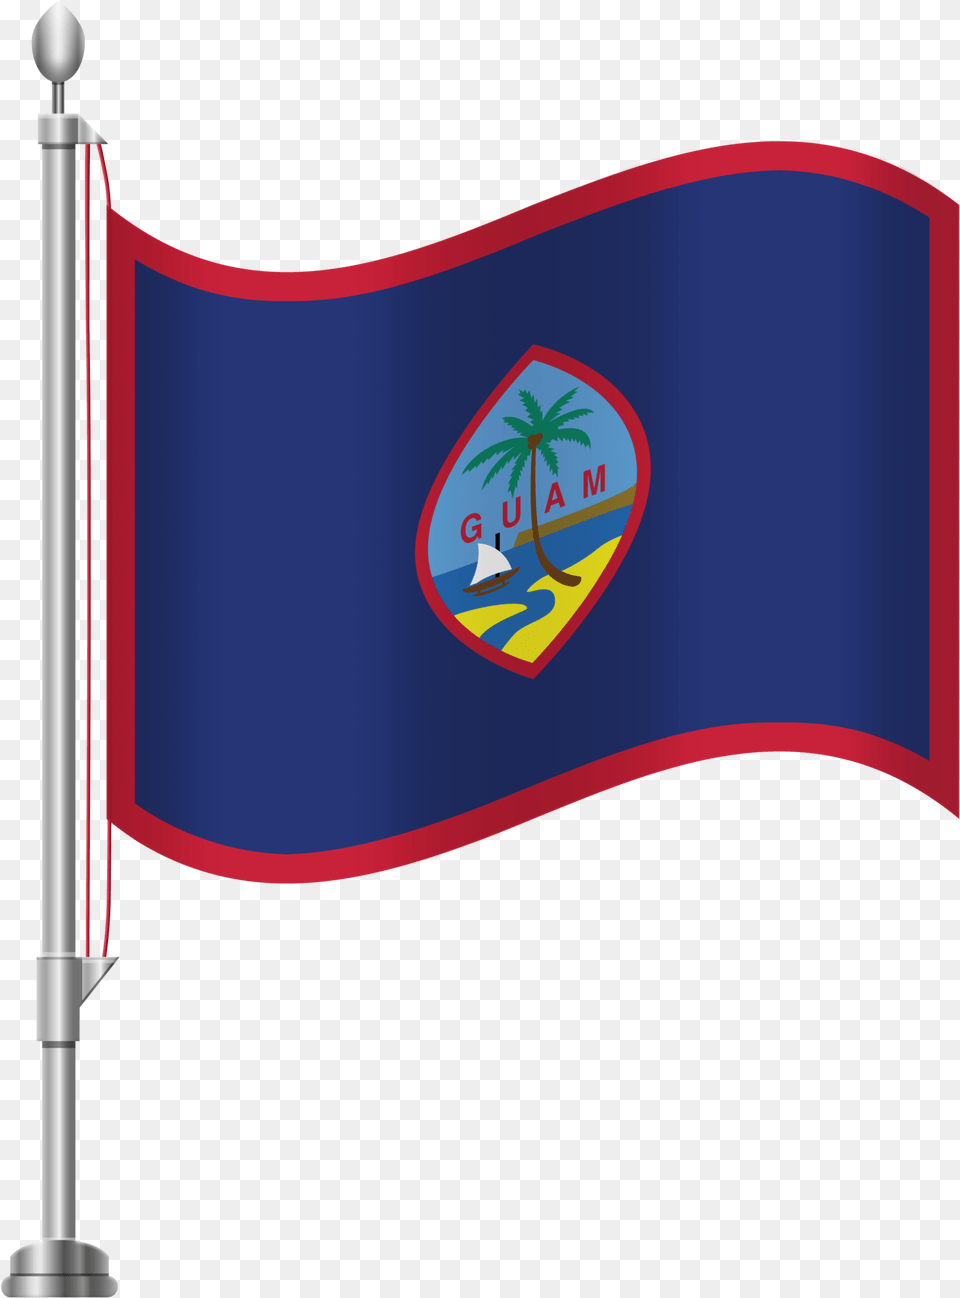 Sierra Leone 57th Independence, Flag Png Image